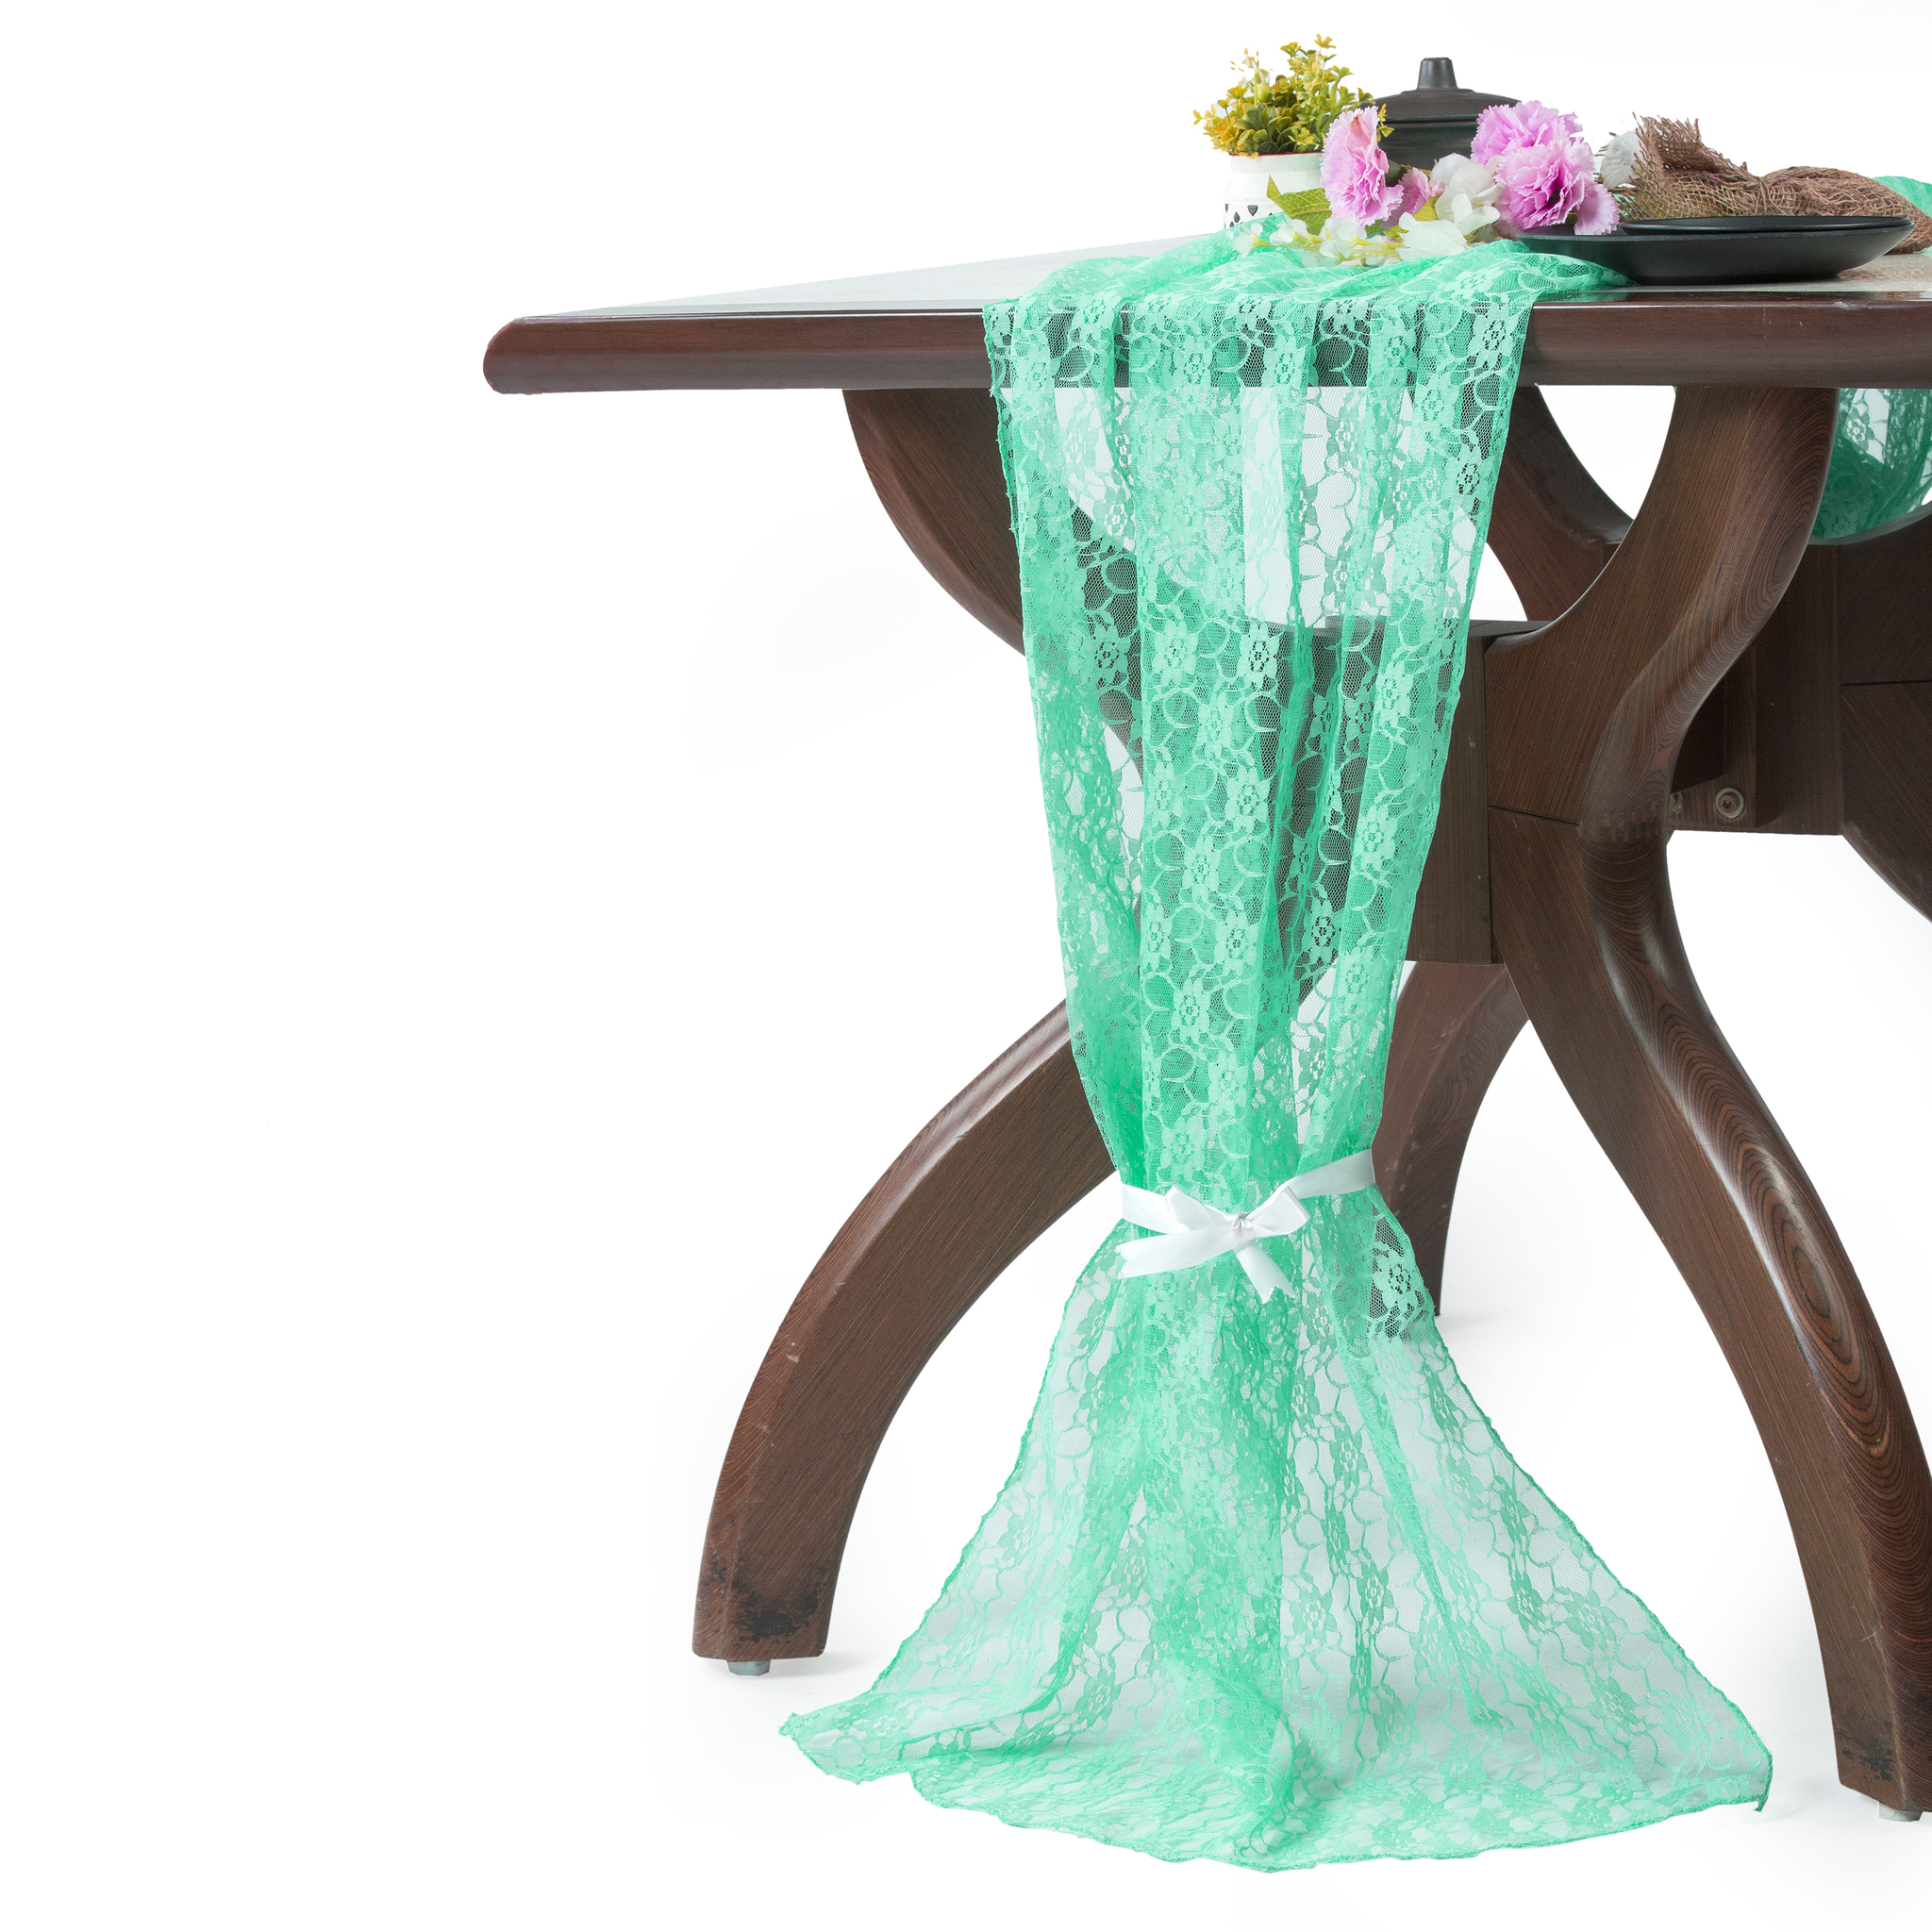 Lace Table Runners -14FT Long